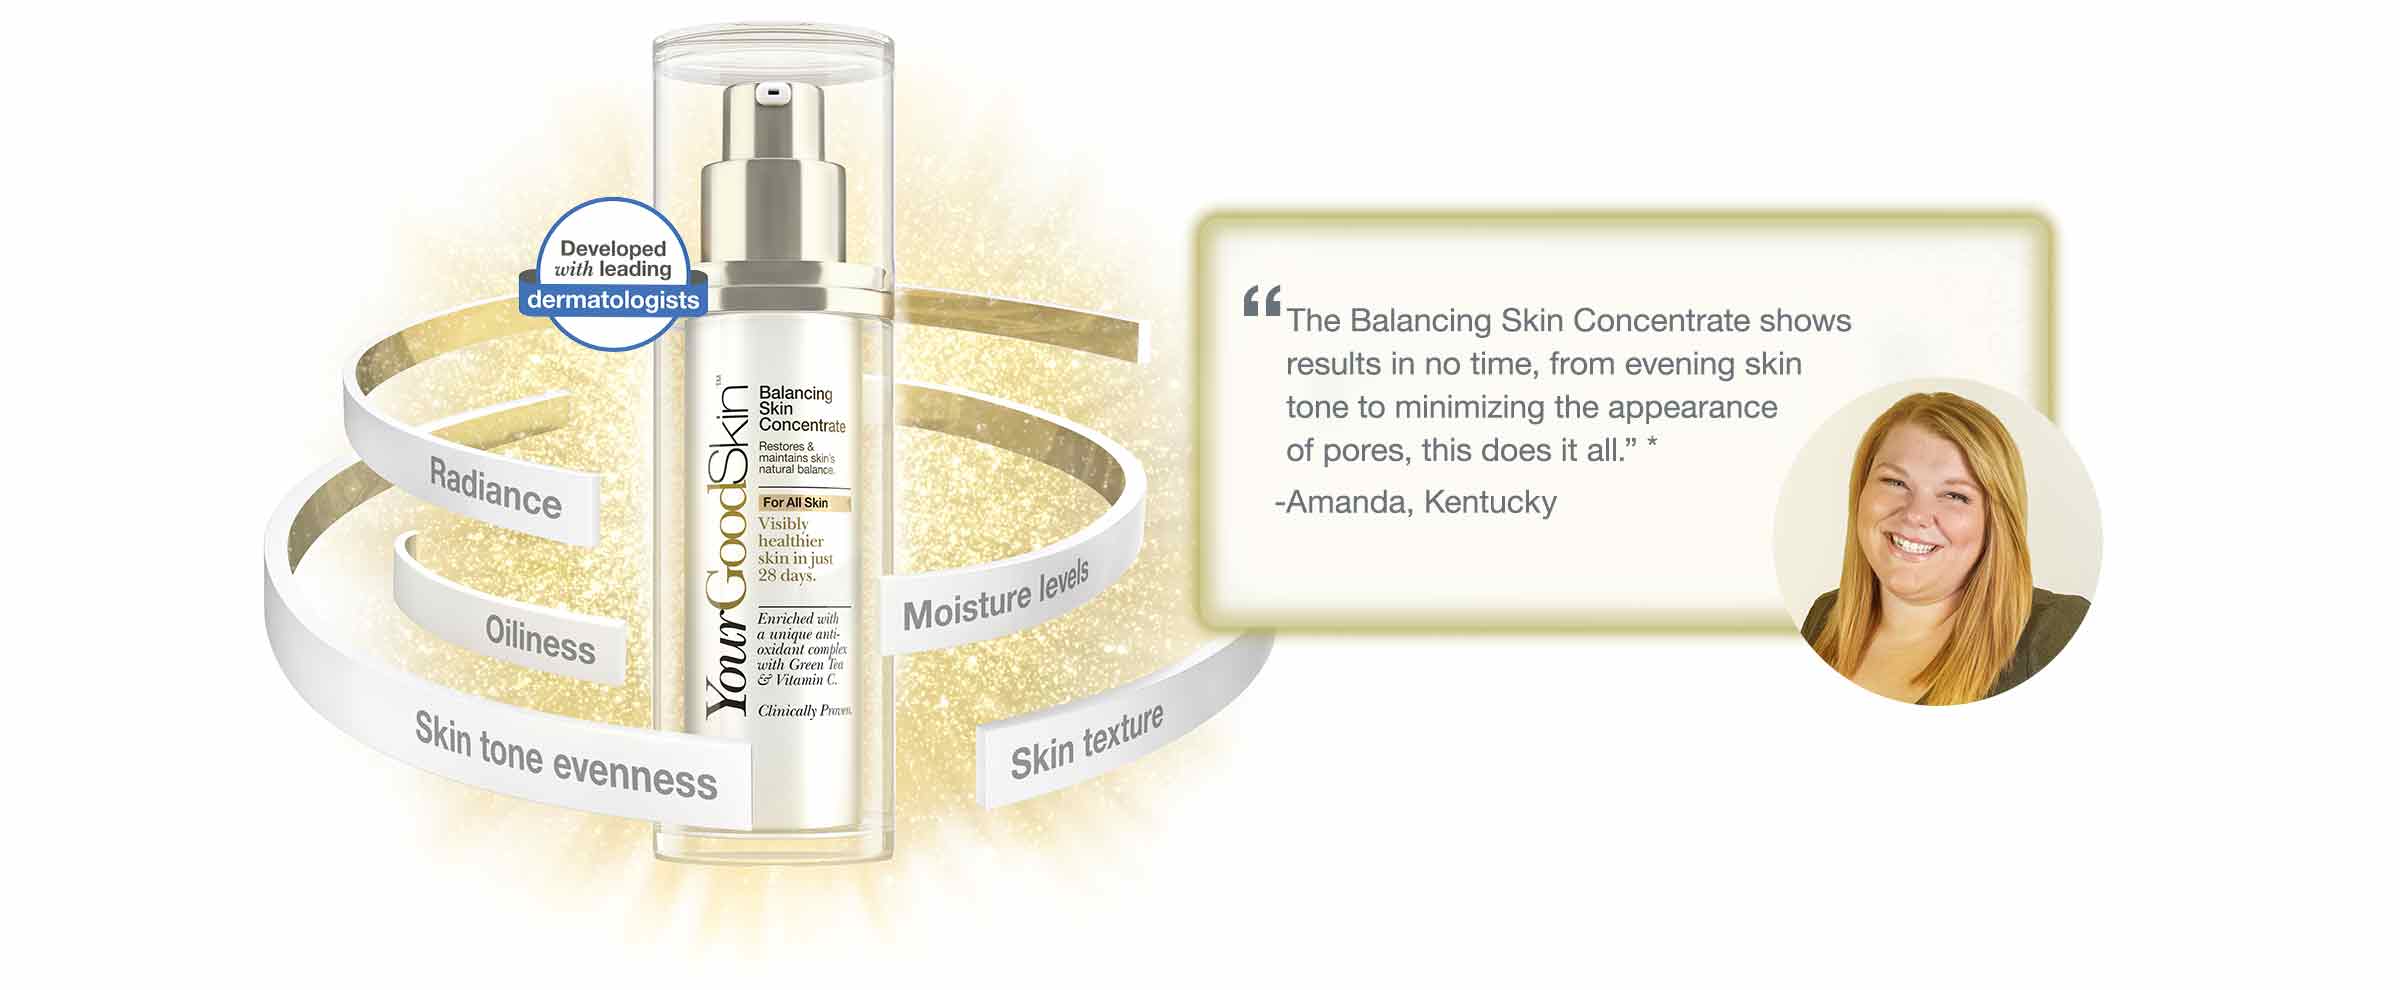 'The Balancing Skin Concentrate shows results in no time, from evening skin tone to minimizing the appearance of pores, this does it all.' -Amanda, Kentucky